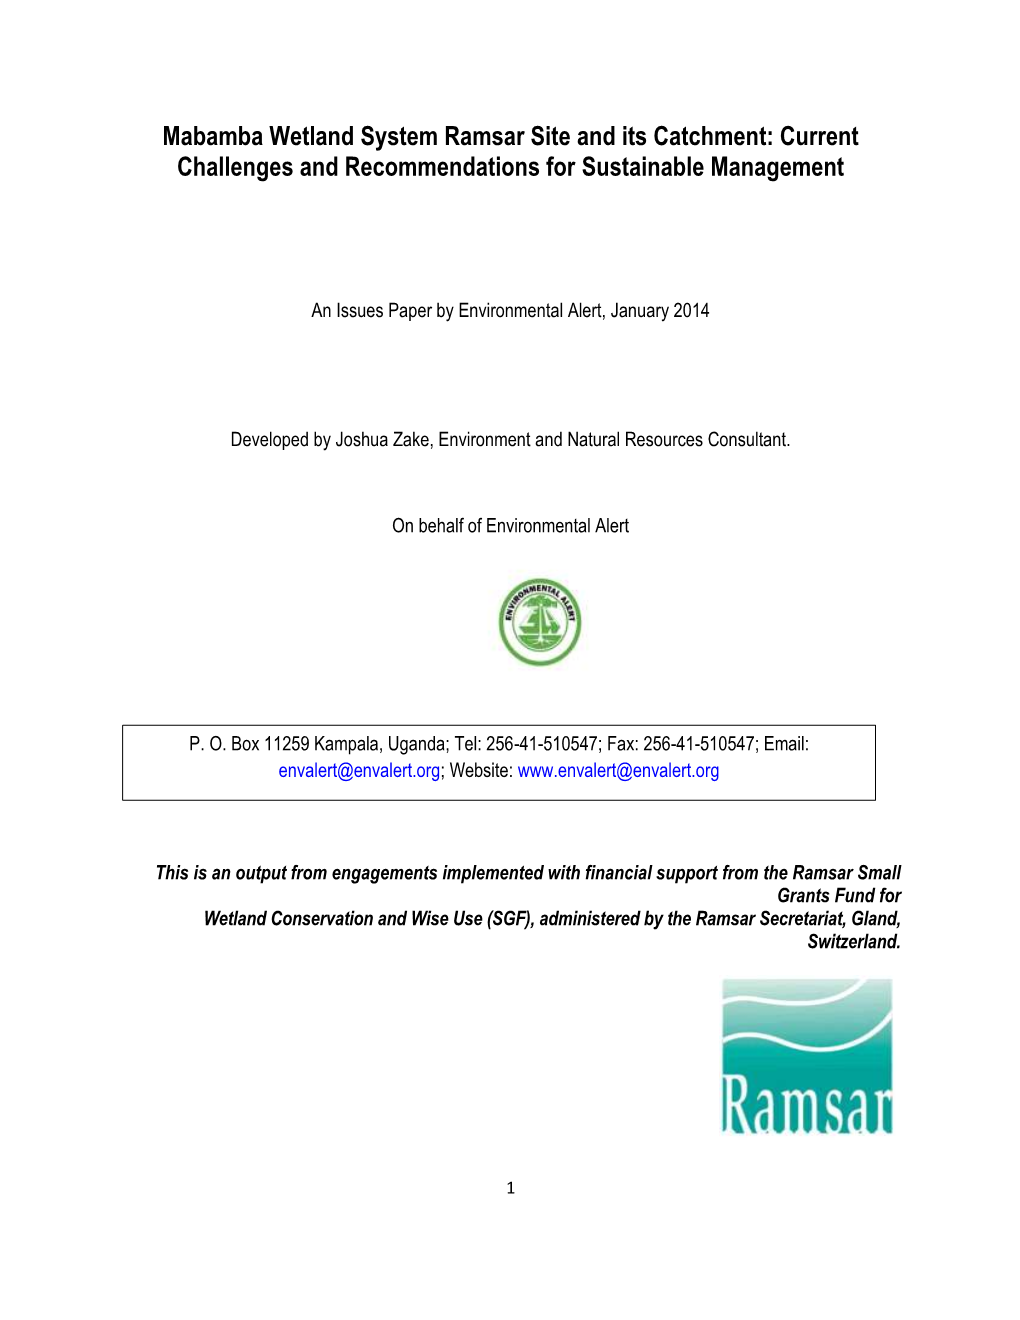 Mabamba Wetland System Ramsar Site and Its Catchment: Current Challenges and Recommendations for Sustainable Management